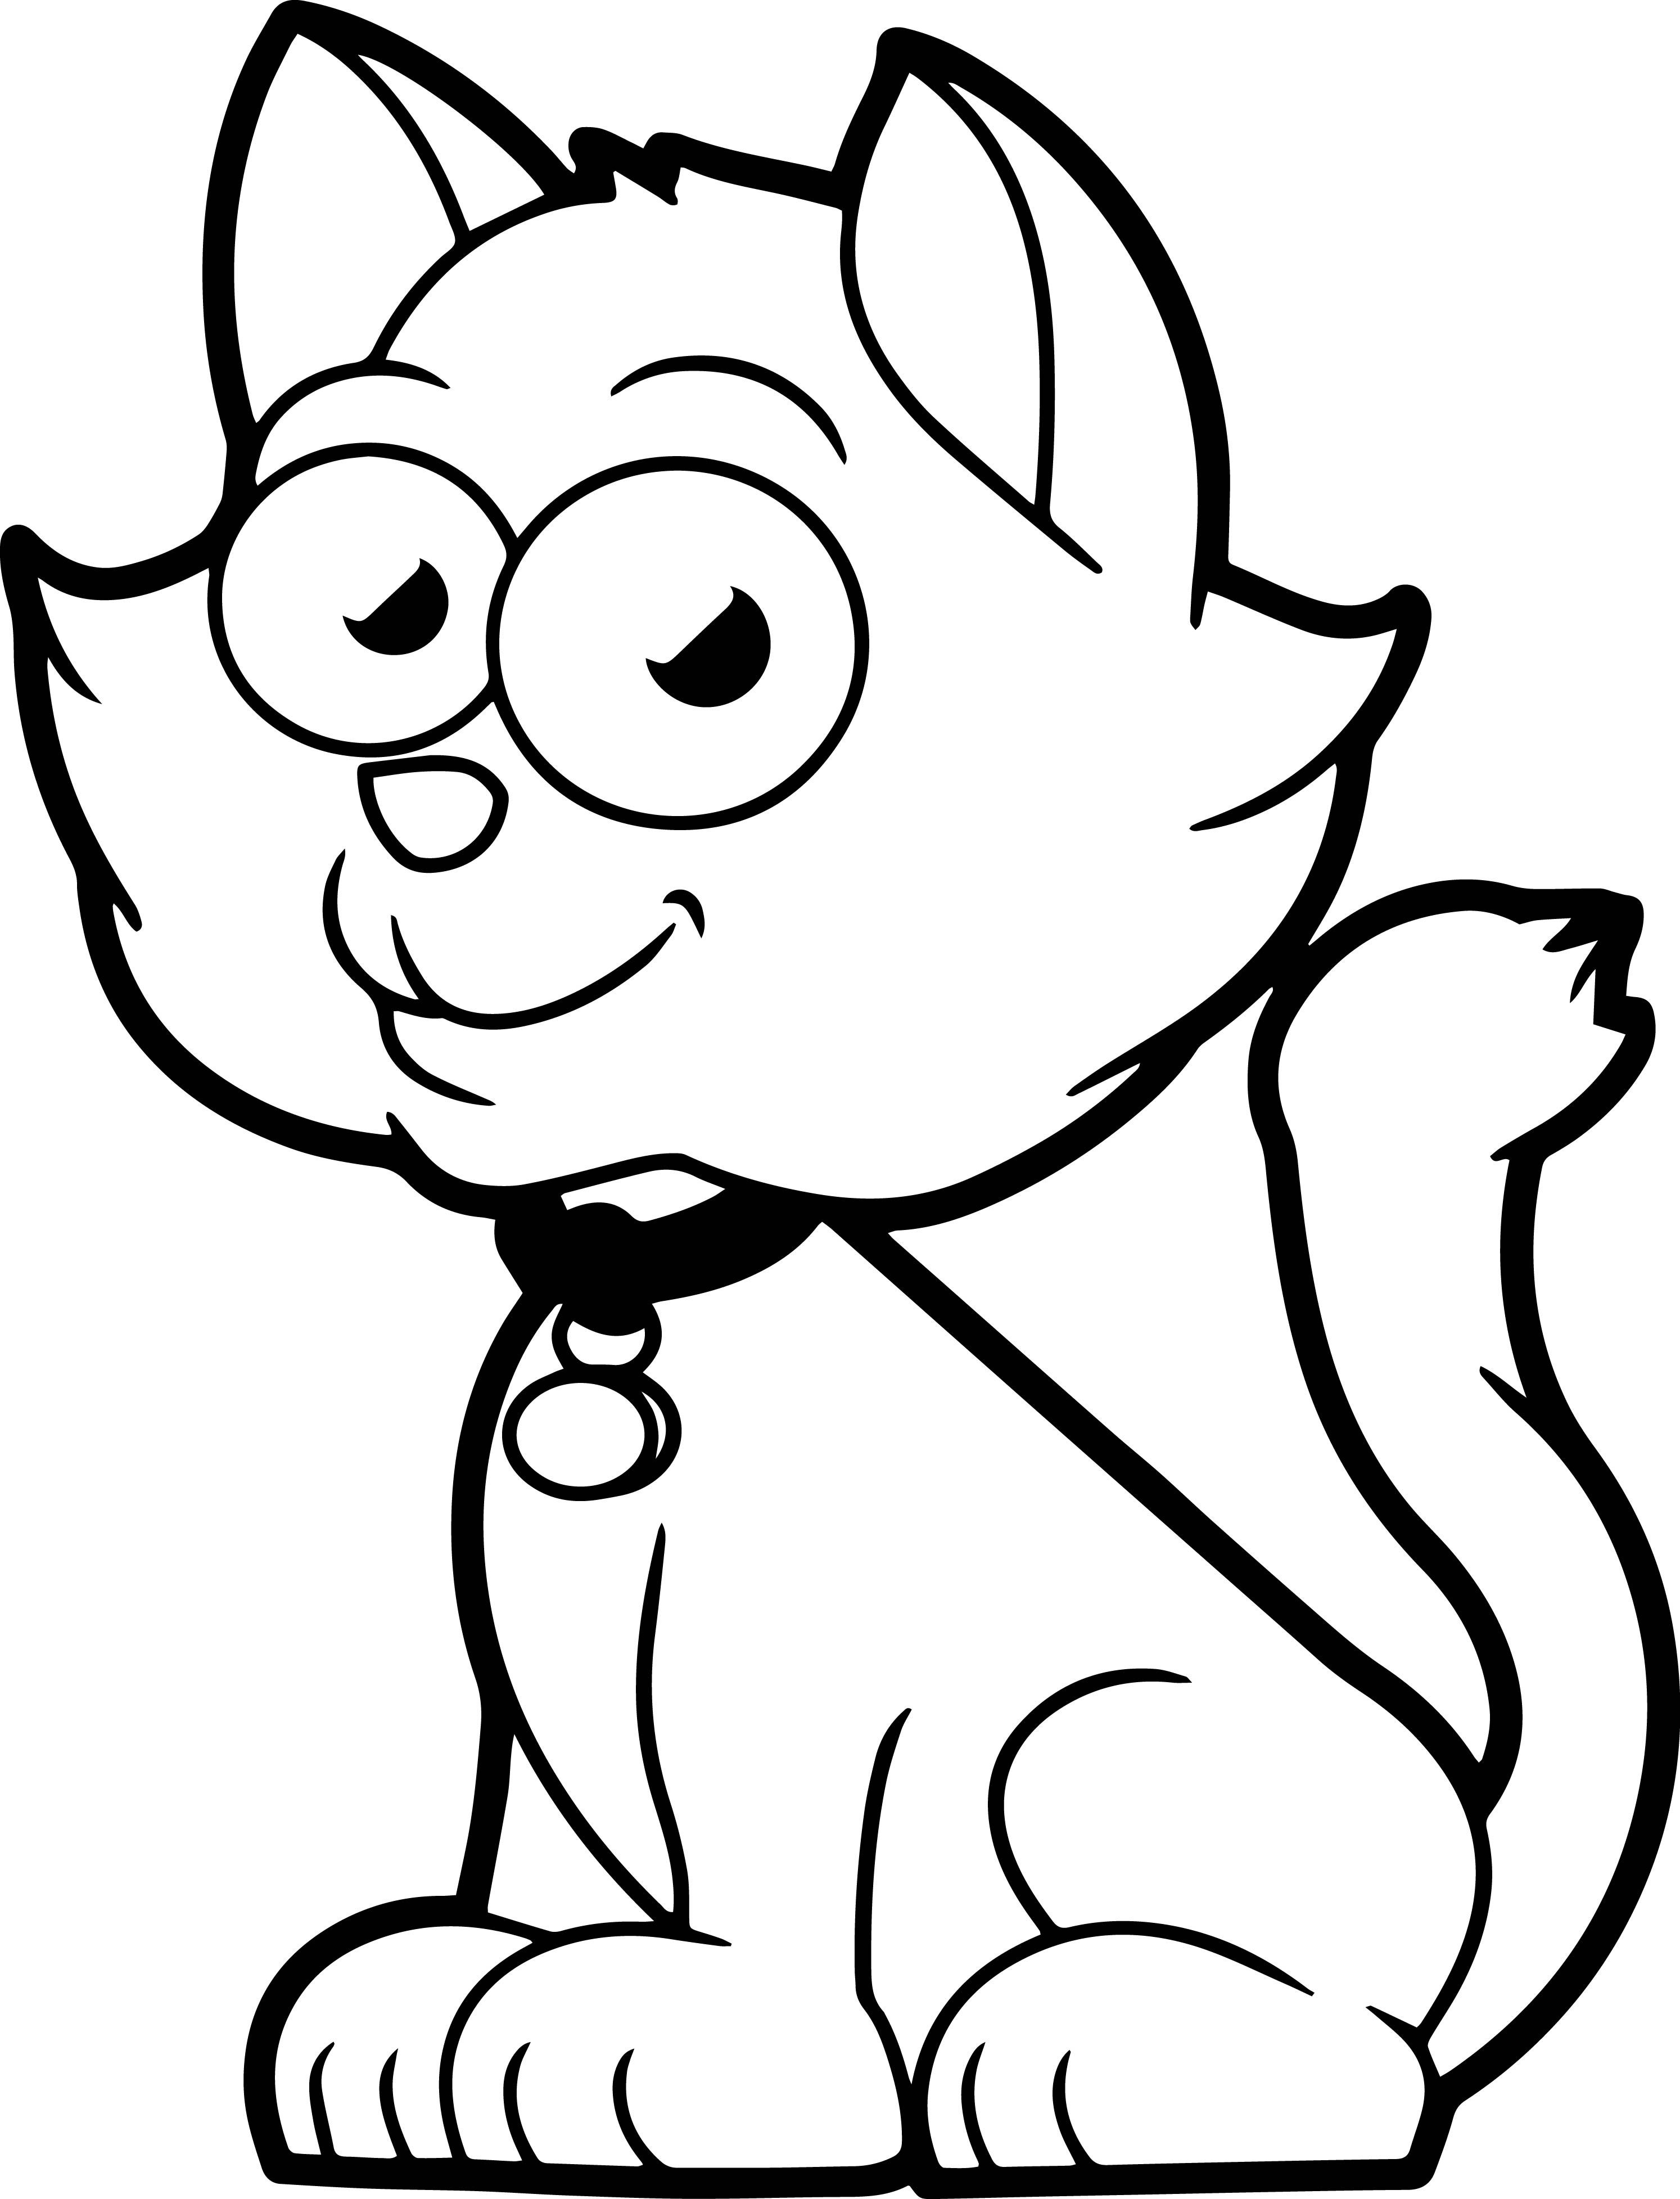 Cat Cartoon Coloring Pages at GetColorings.com | Free printable